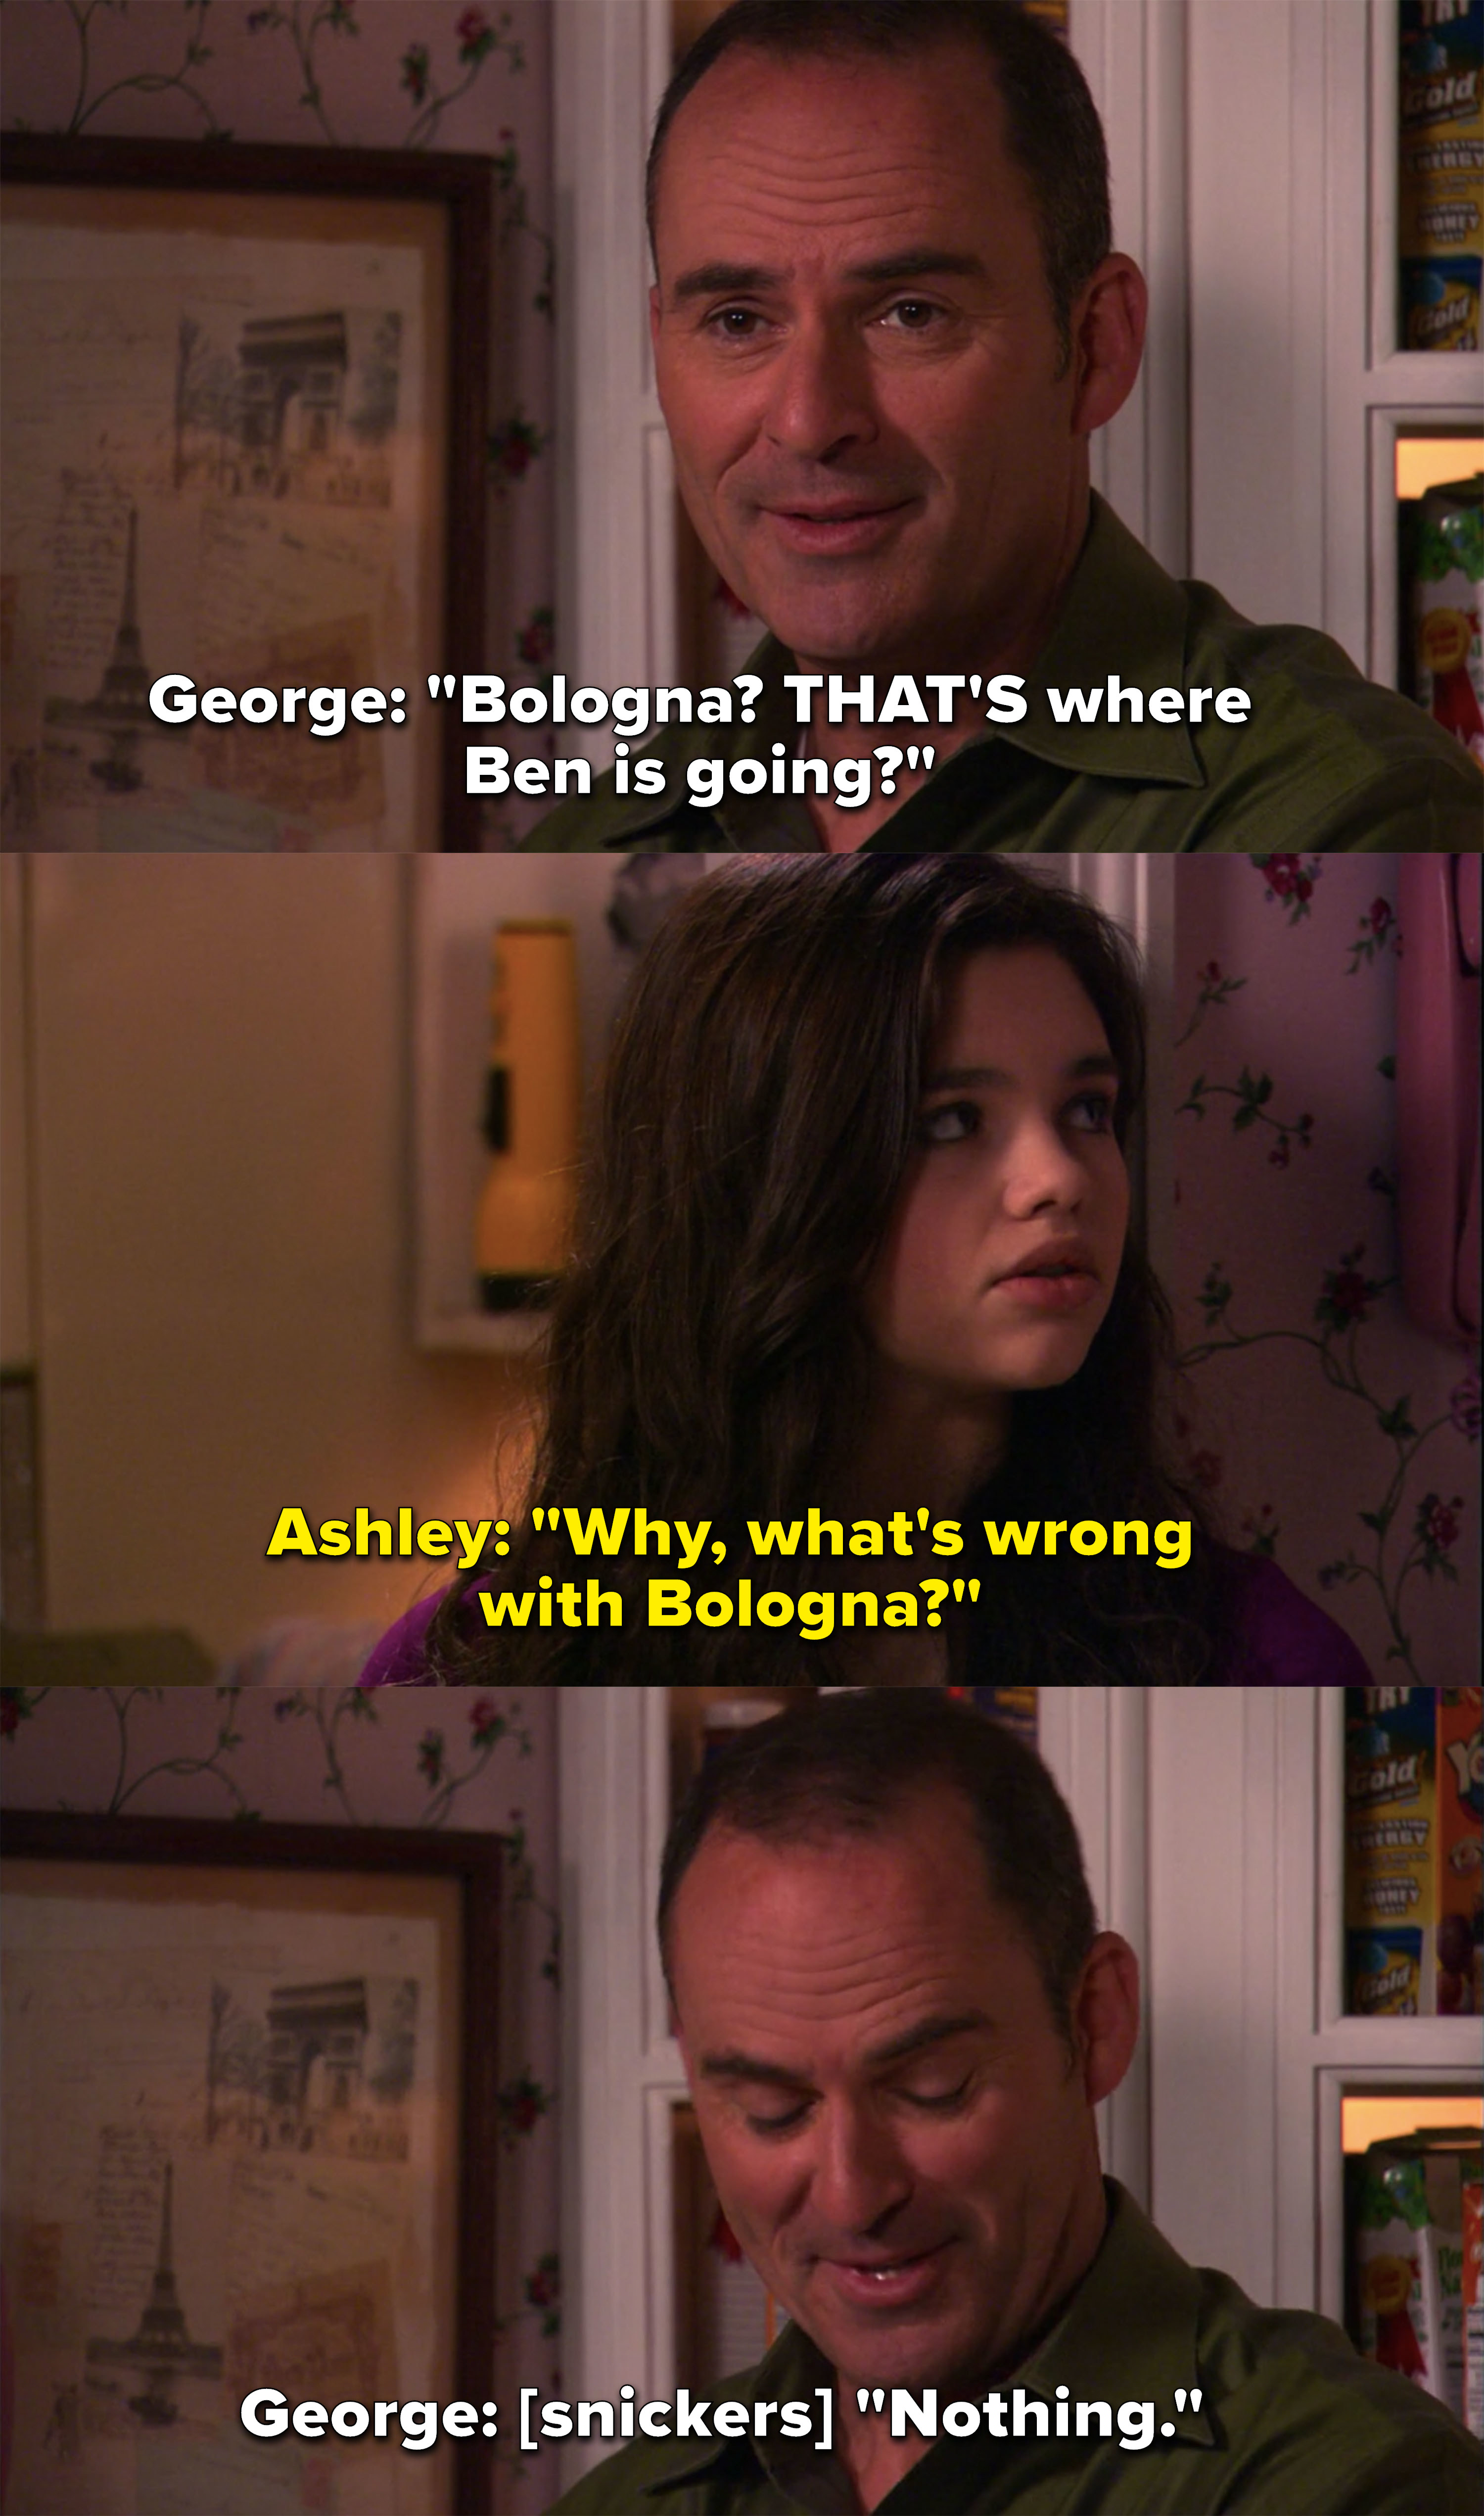 Ashley asks what&#x27;s wrong with Bologna and George snickers